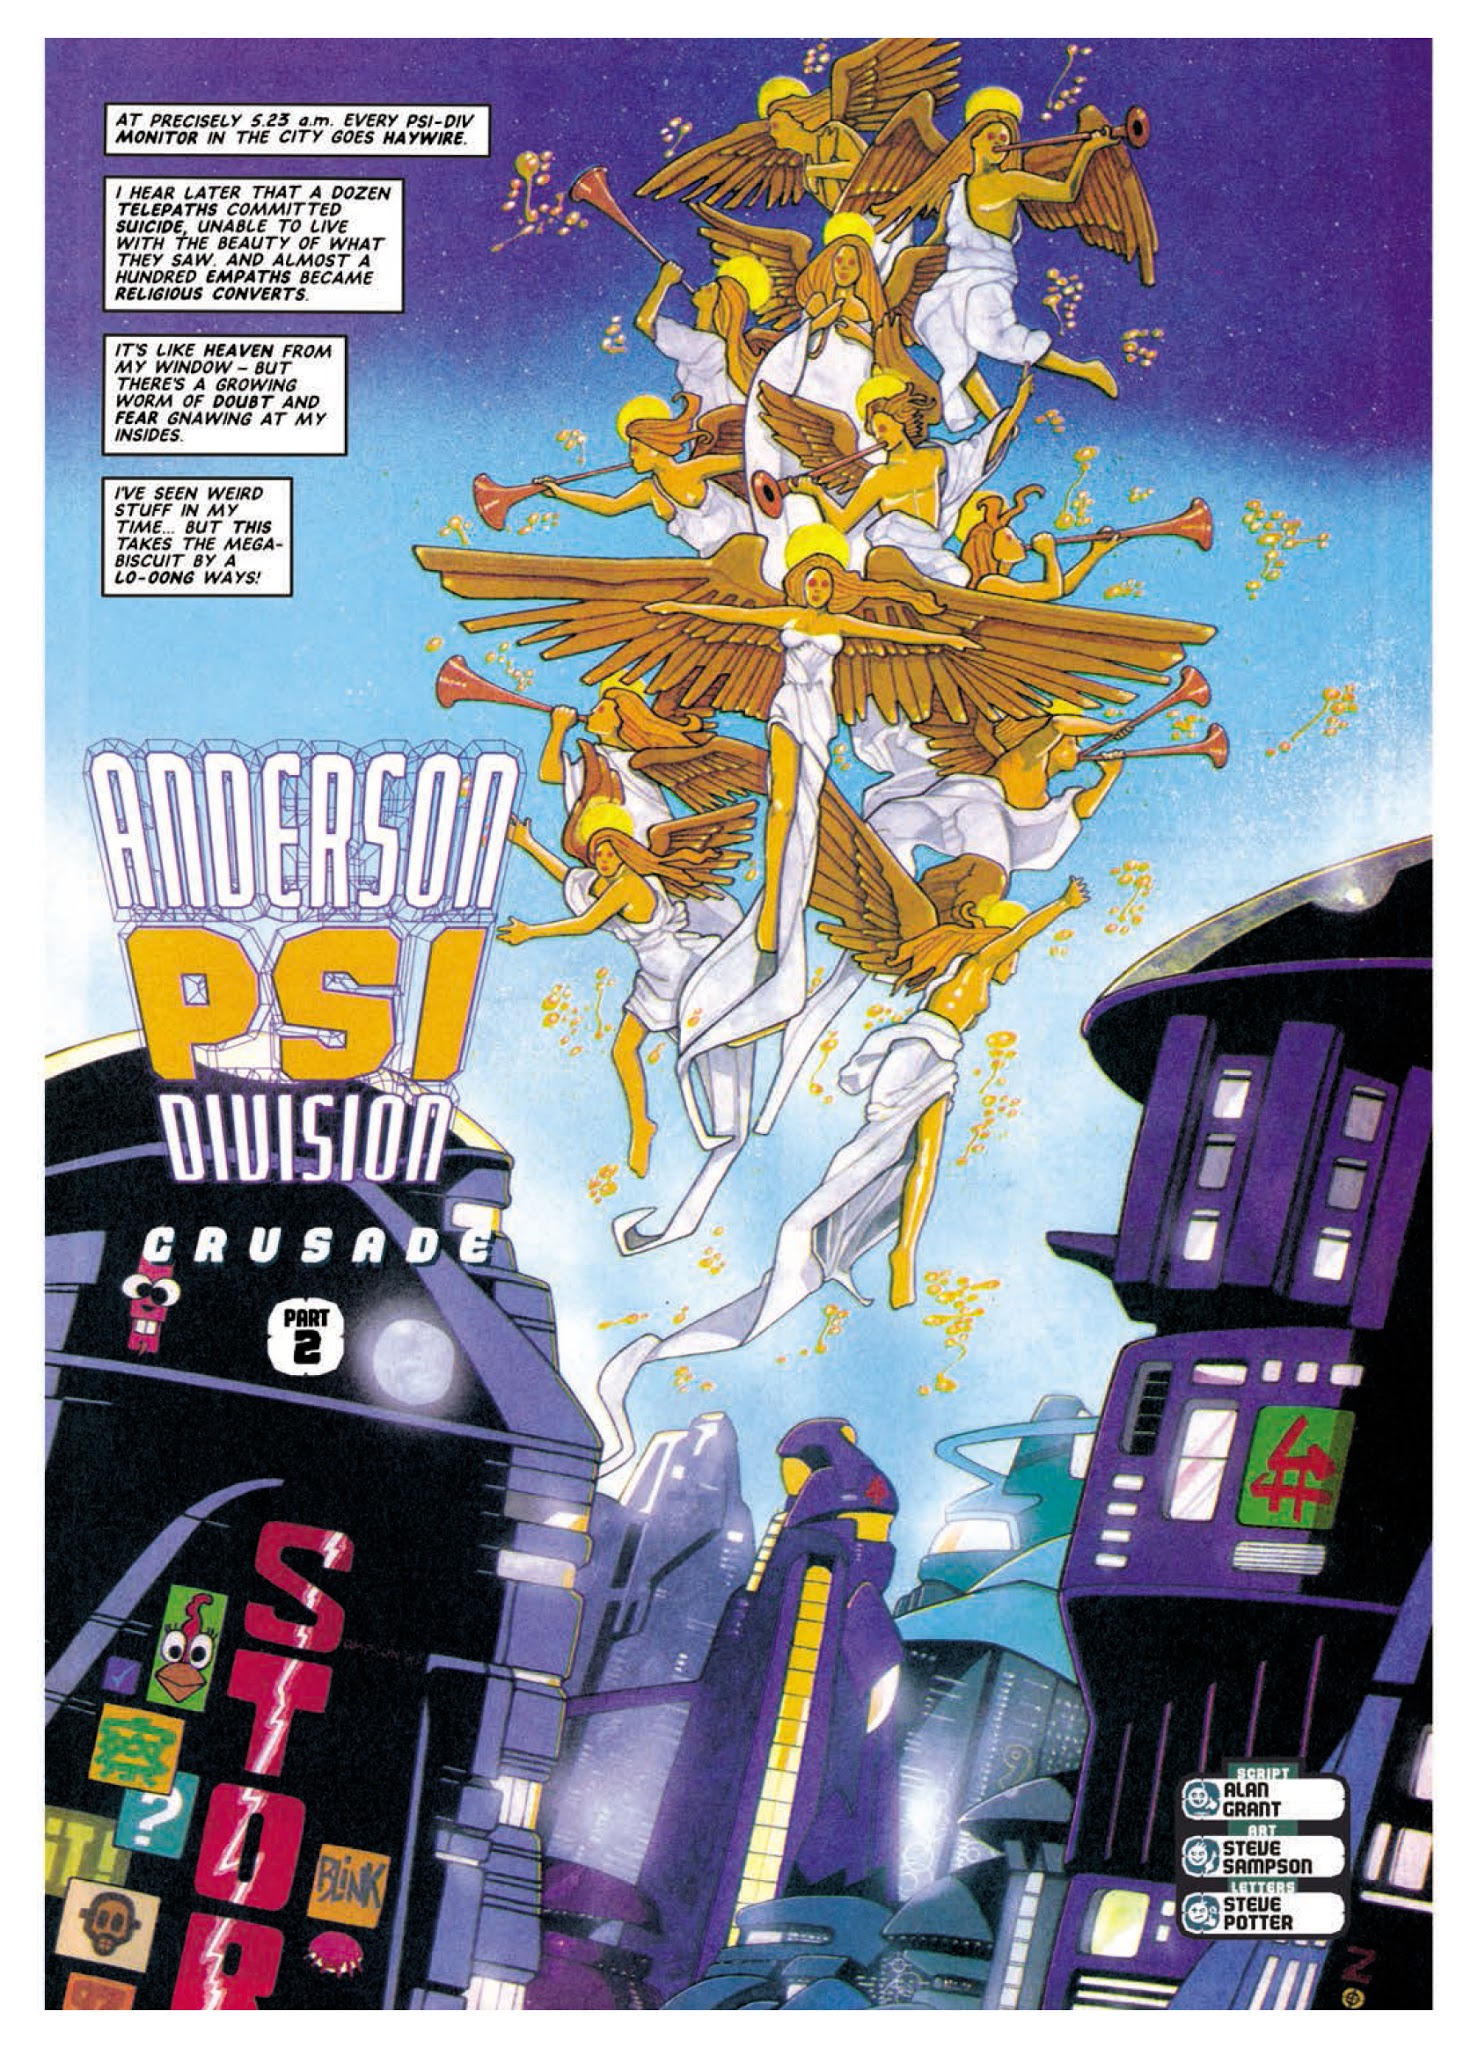 Read online Judge Anderson: The Psi Files comic -  Issue # TPB 3 - 157